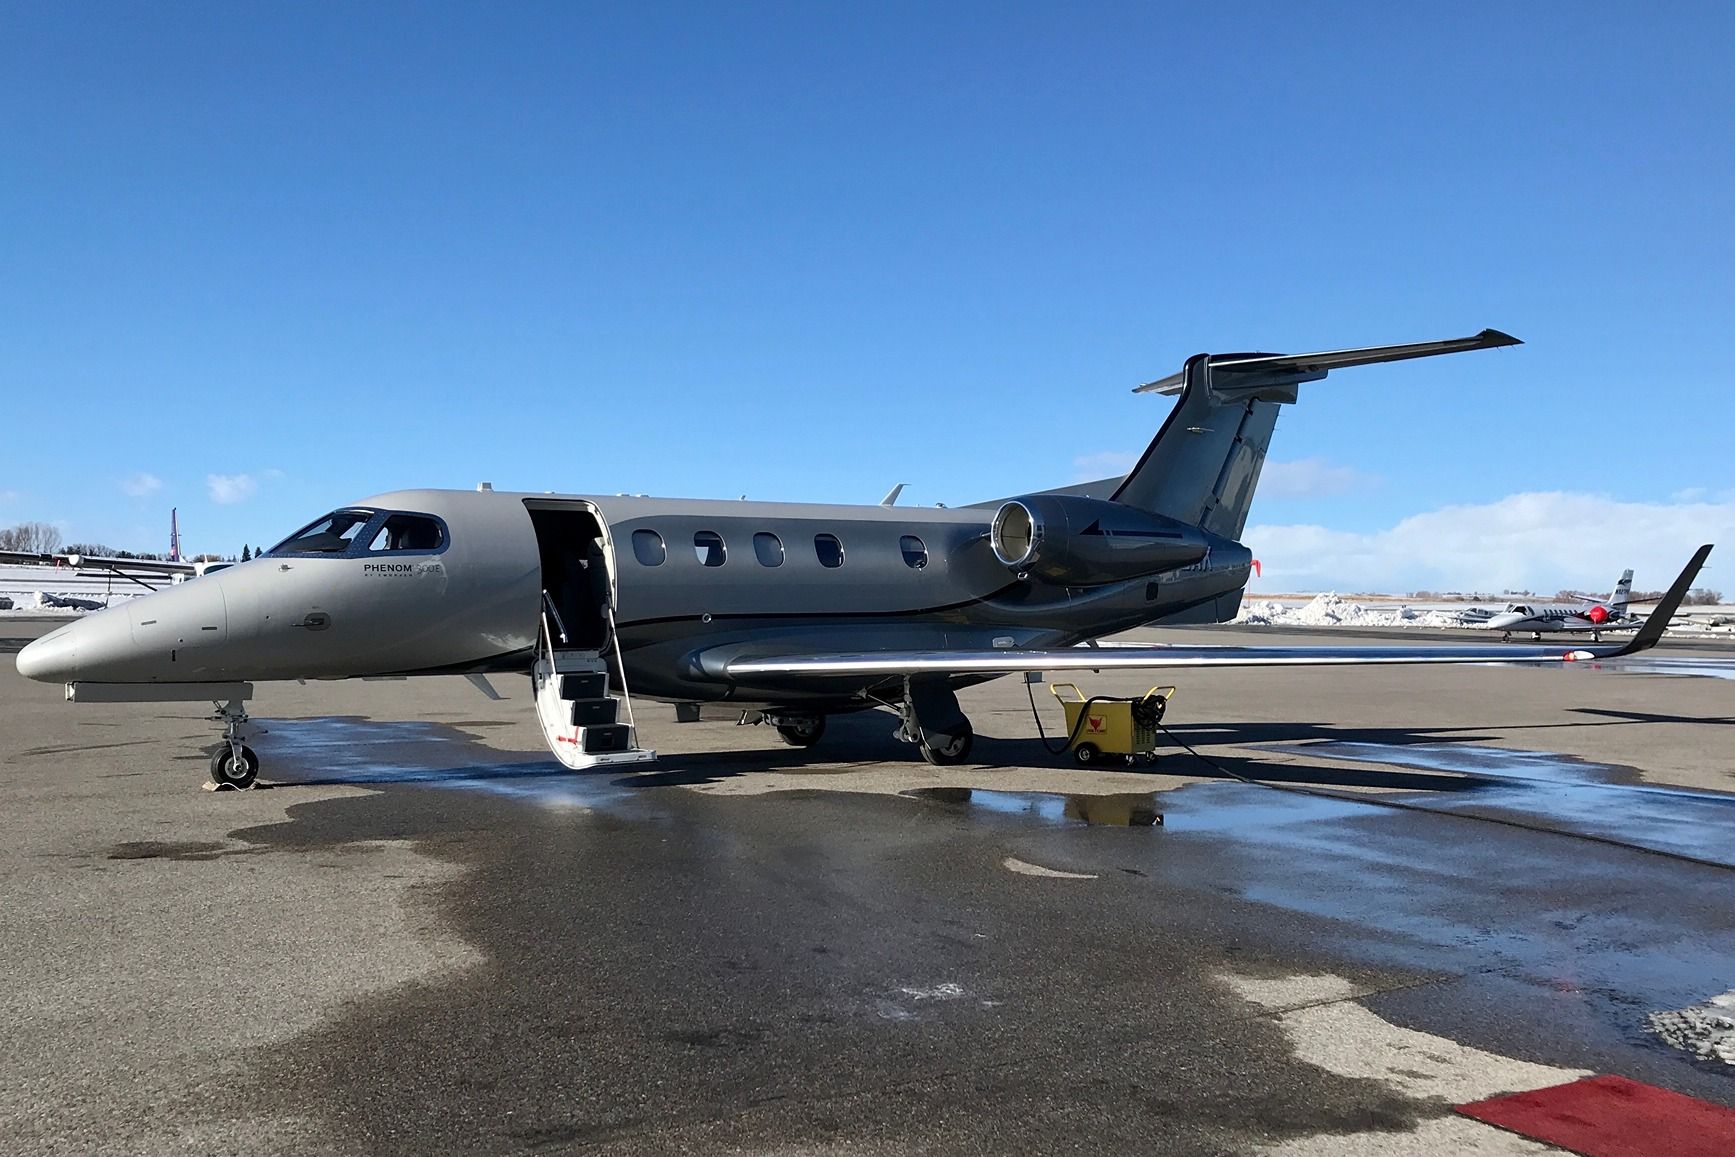 An Embraer Phenom 300E parked on an airport apron.